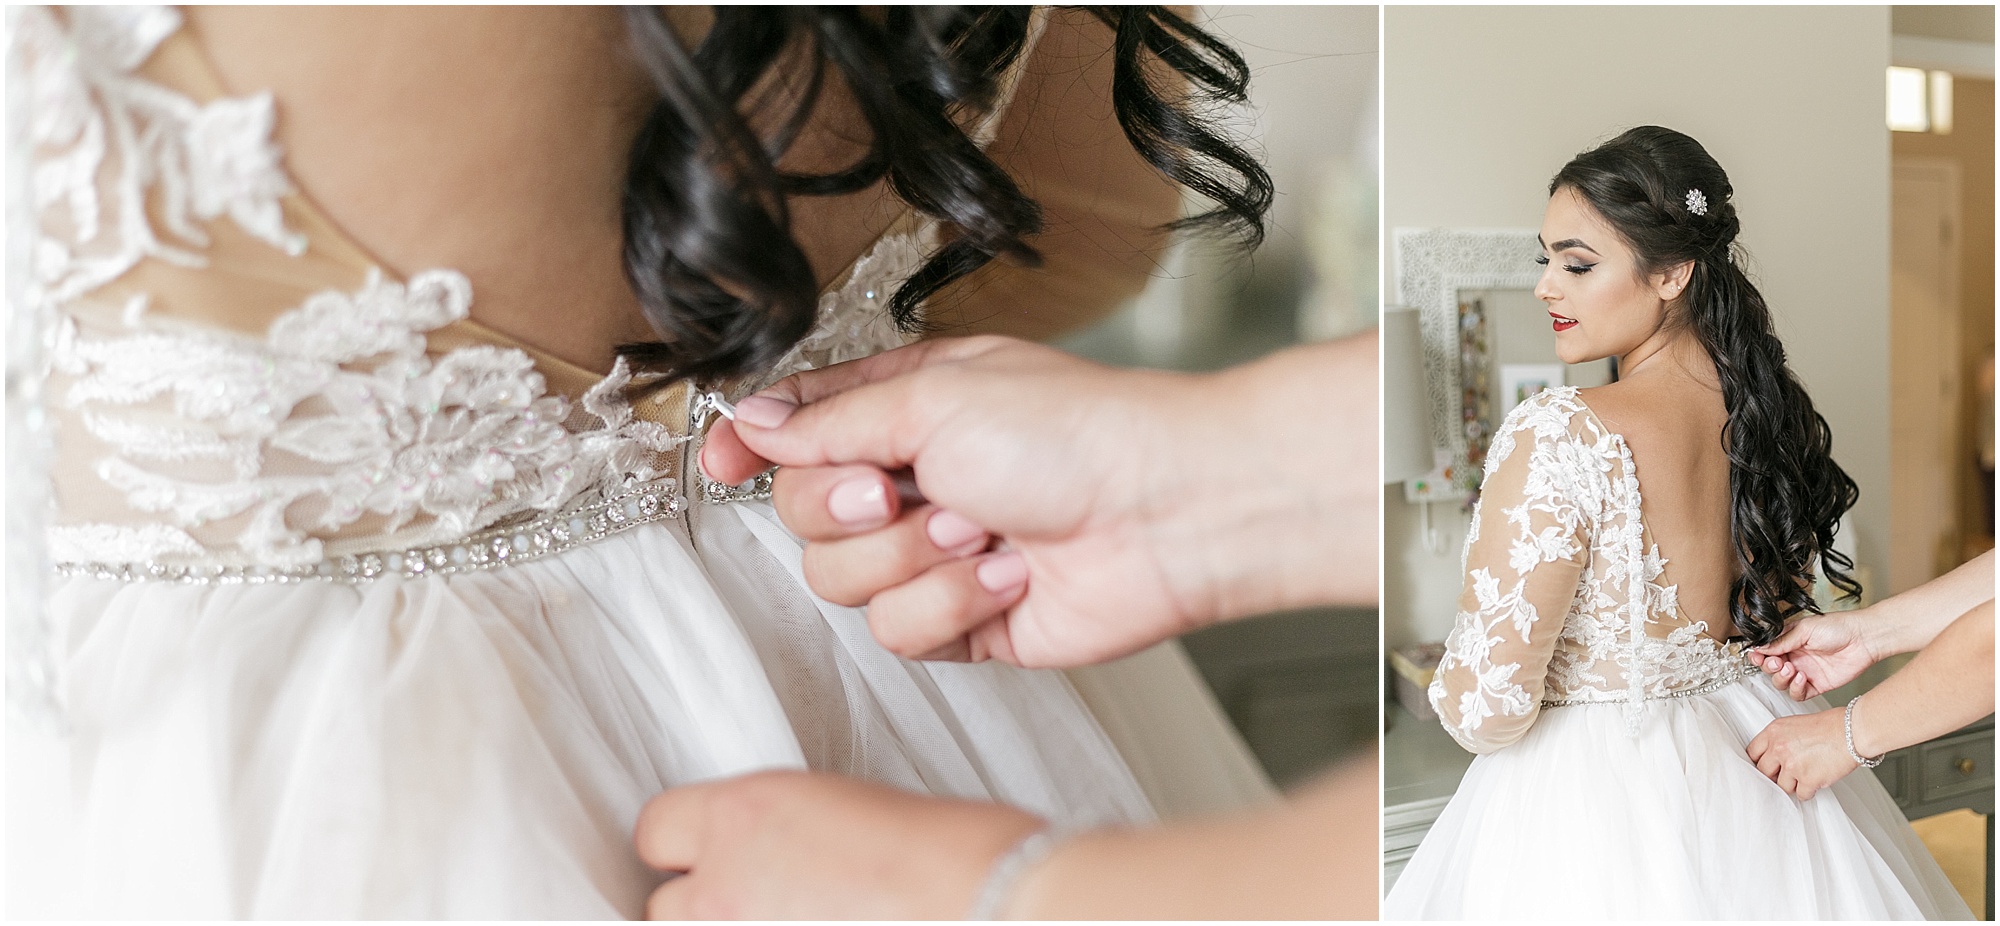 Bride having her dress zipped up by her bridesmaid. 